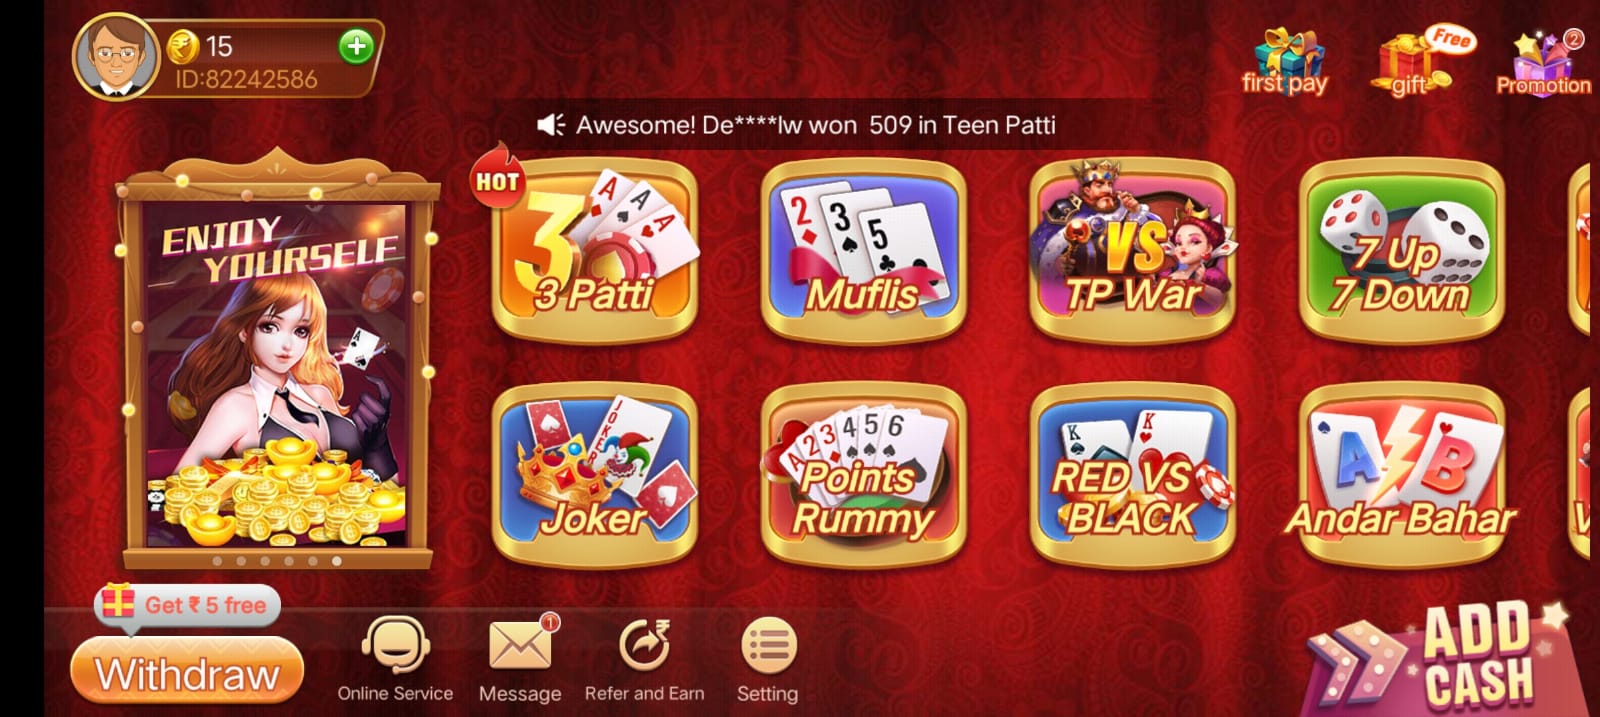 Available Games on Teen Patti Gold App